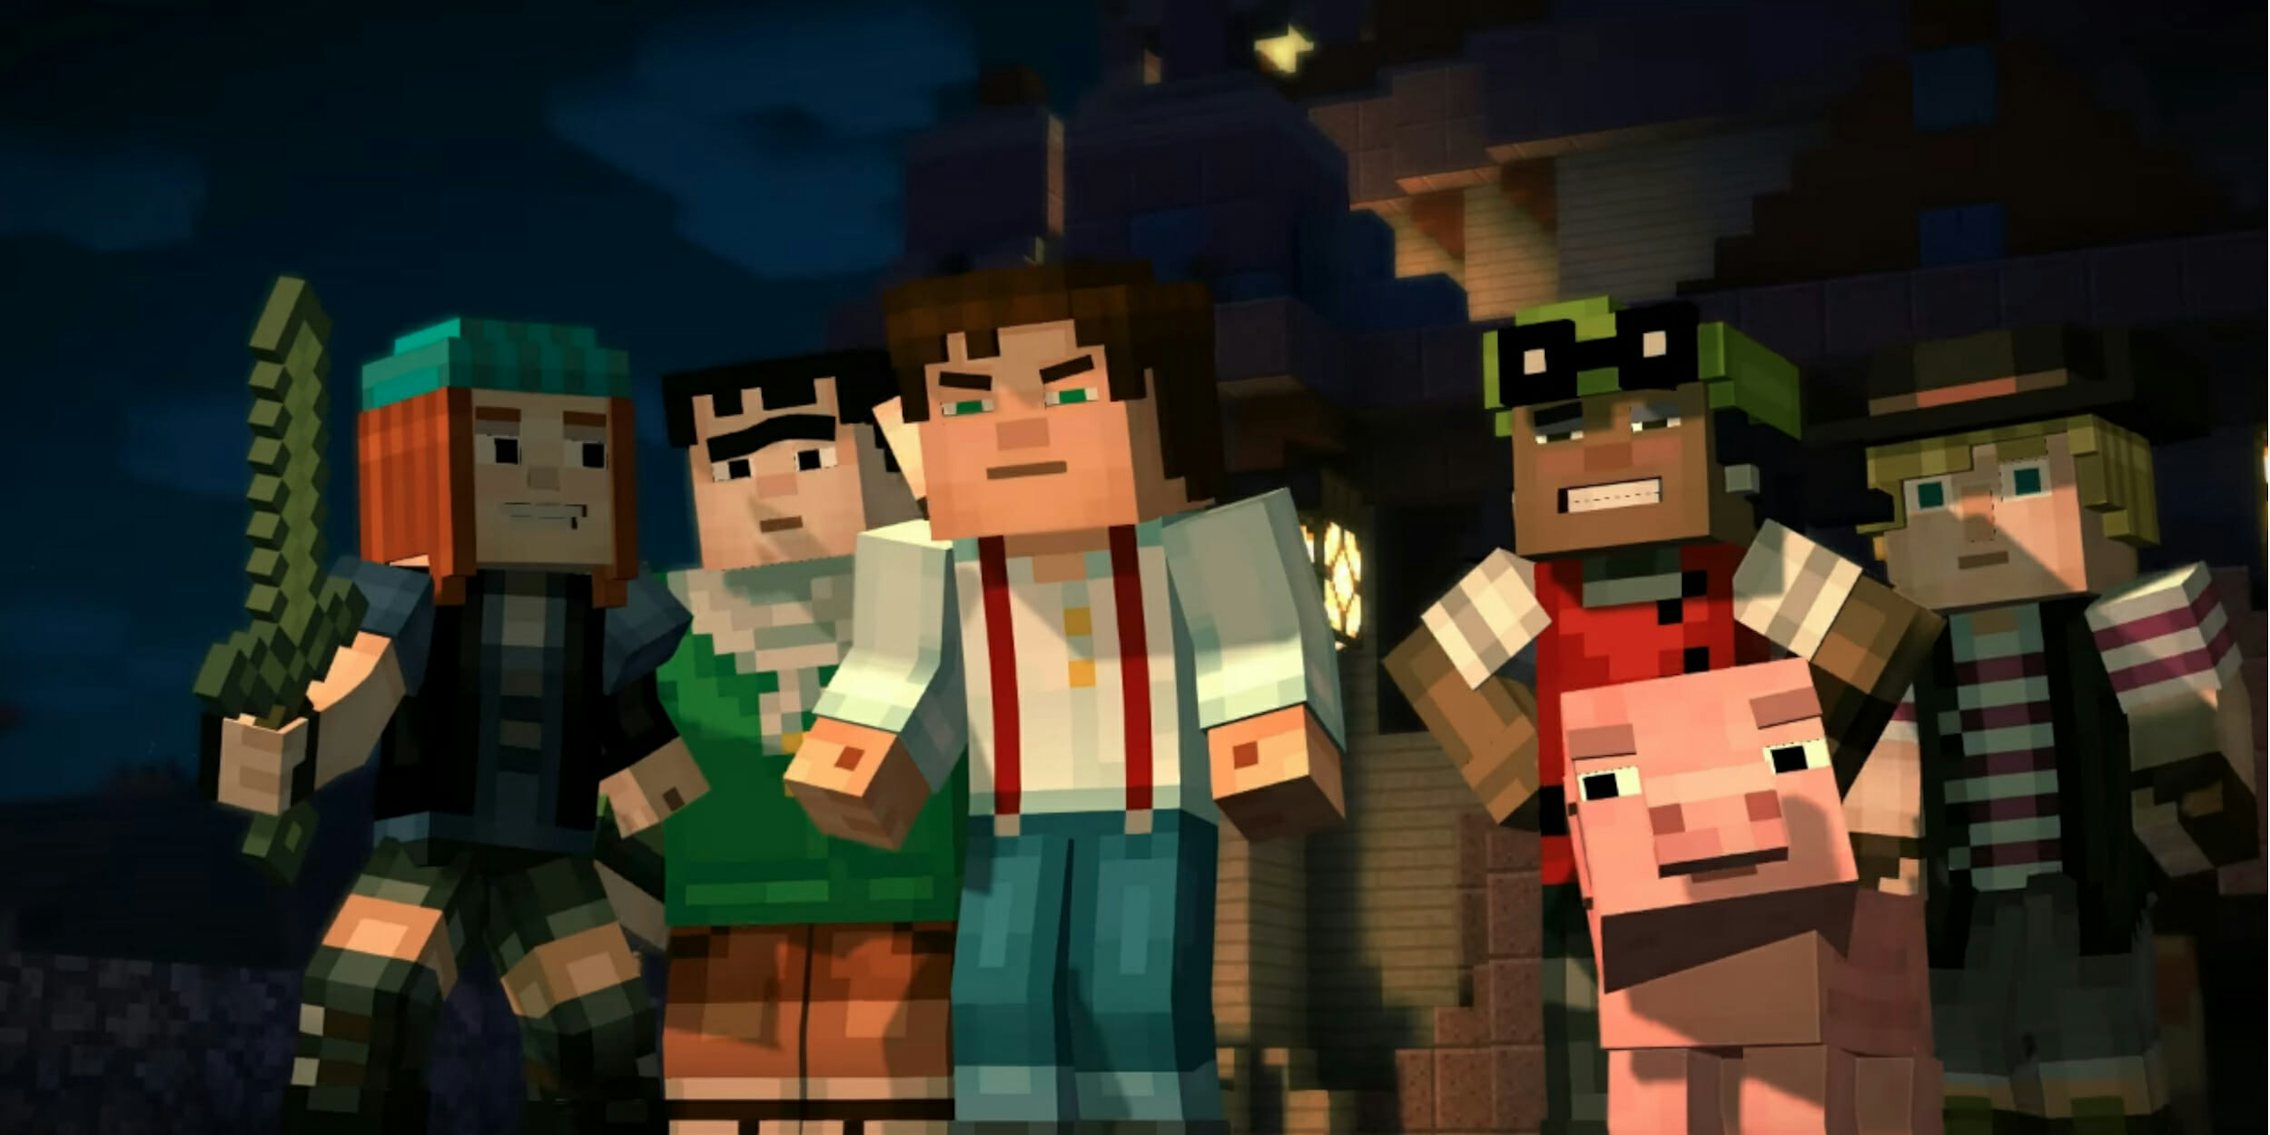 Minecraft: Story Mode' game coming to Netflix as interactive series -  FlatpanelsHD